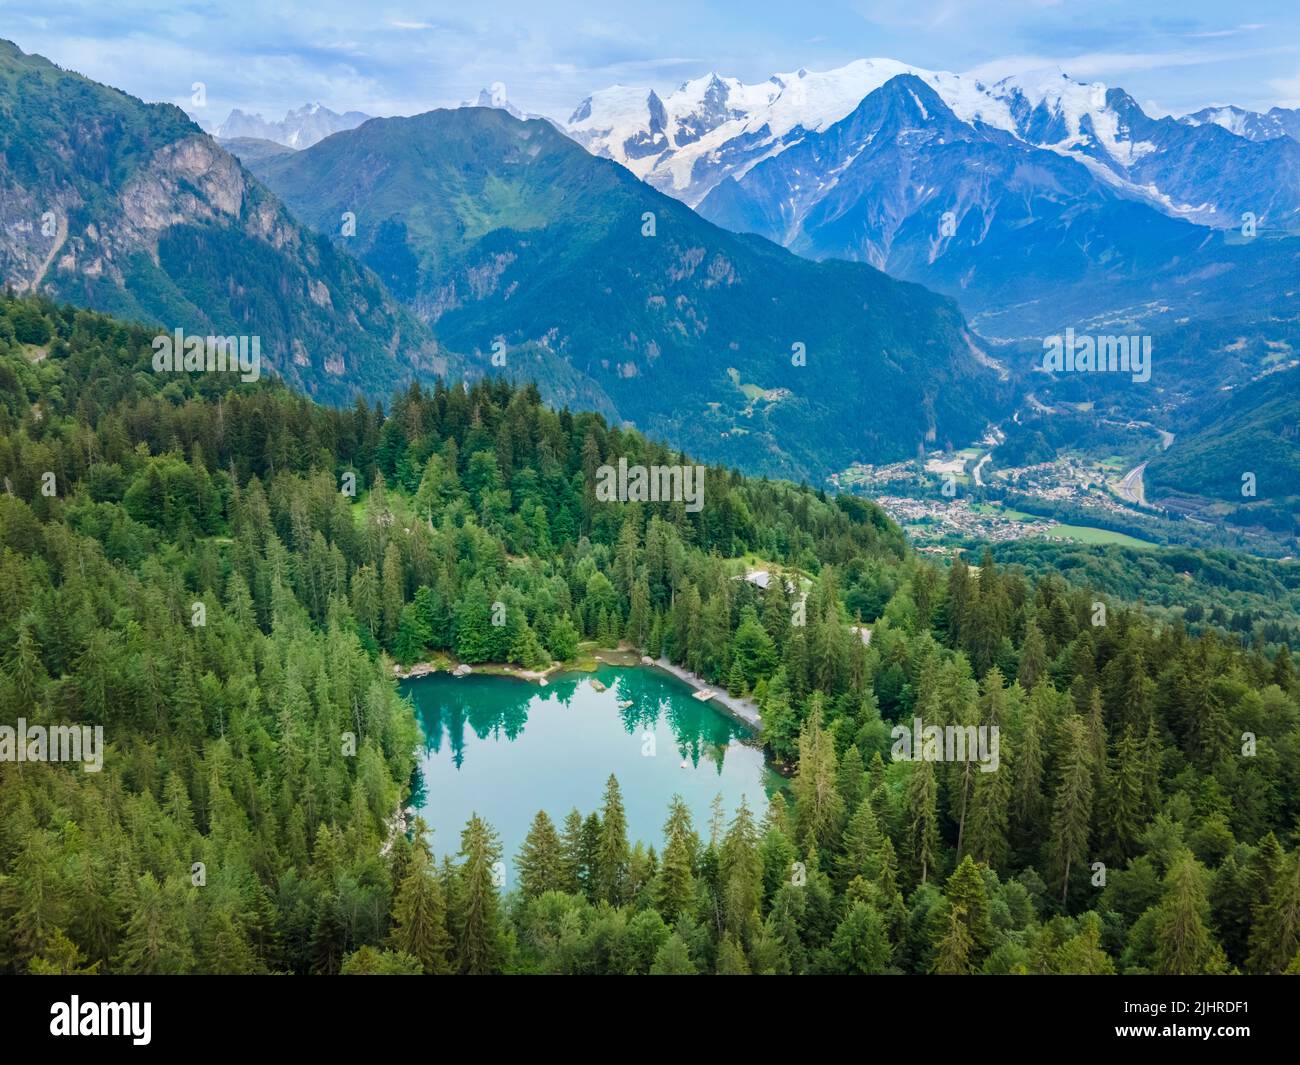 View of Mont Blanc and Lac Vert in Alps mountains near Chamonix, France. Summer French alpine scenery with fir tree forest, lake and green valley. Stock Photo